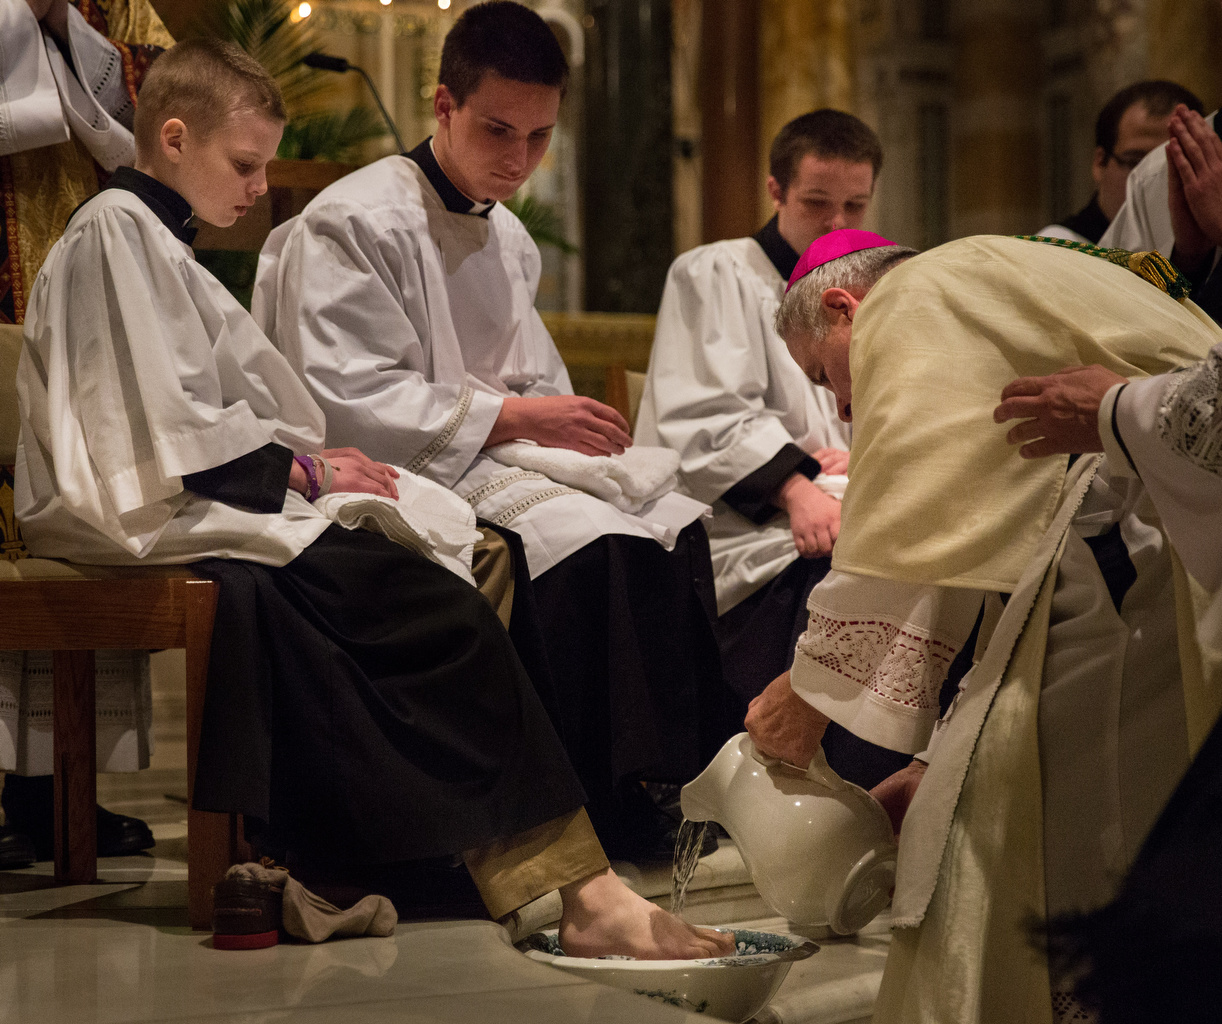 Priest for a Day' is a wish come true for 11-year-old Missouri boy.